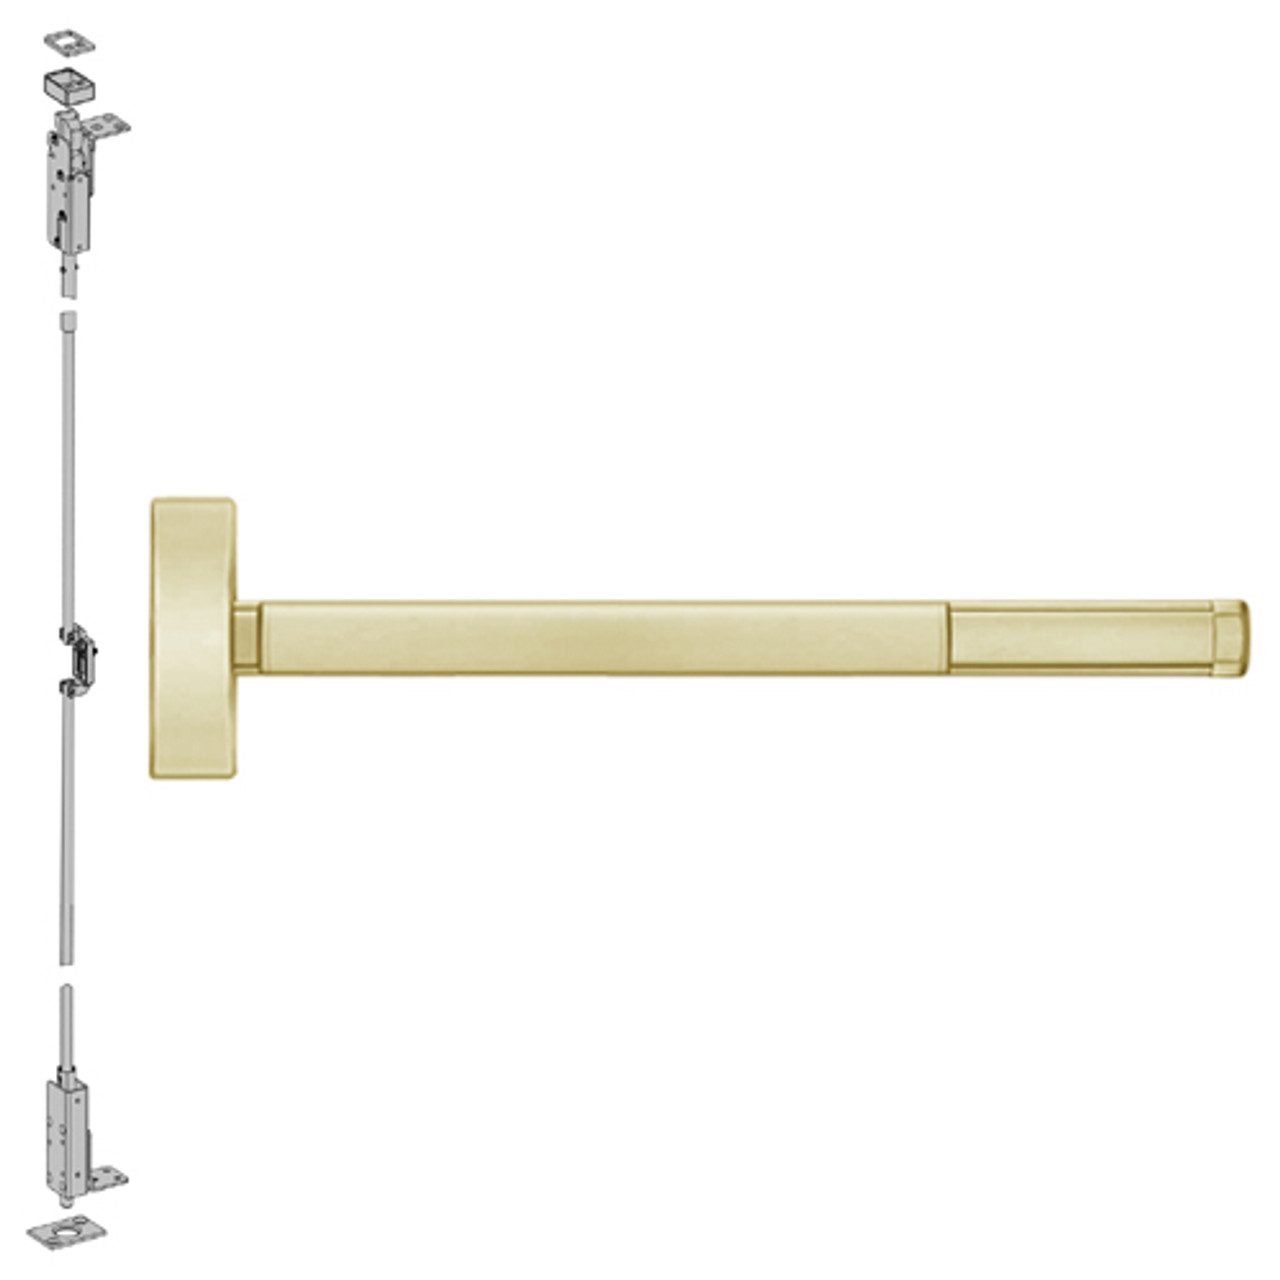 ELR2702LBR-606-36 PHI 2700 Series Wood Door Concealed Vertical Exit Device with Electric Latch Retraction Prepped for Dummy Trim in Satin Brass Finish